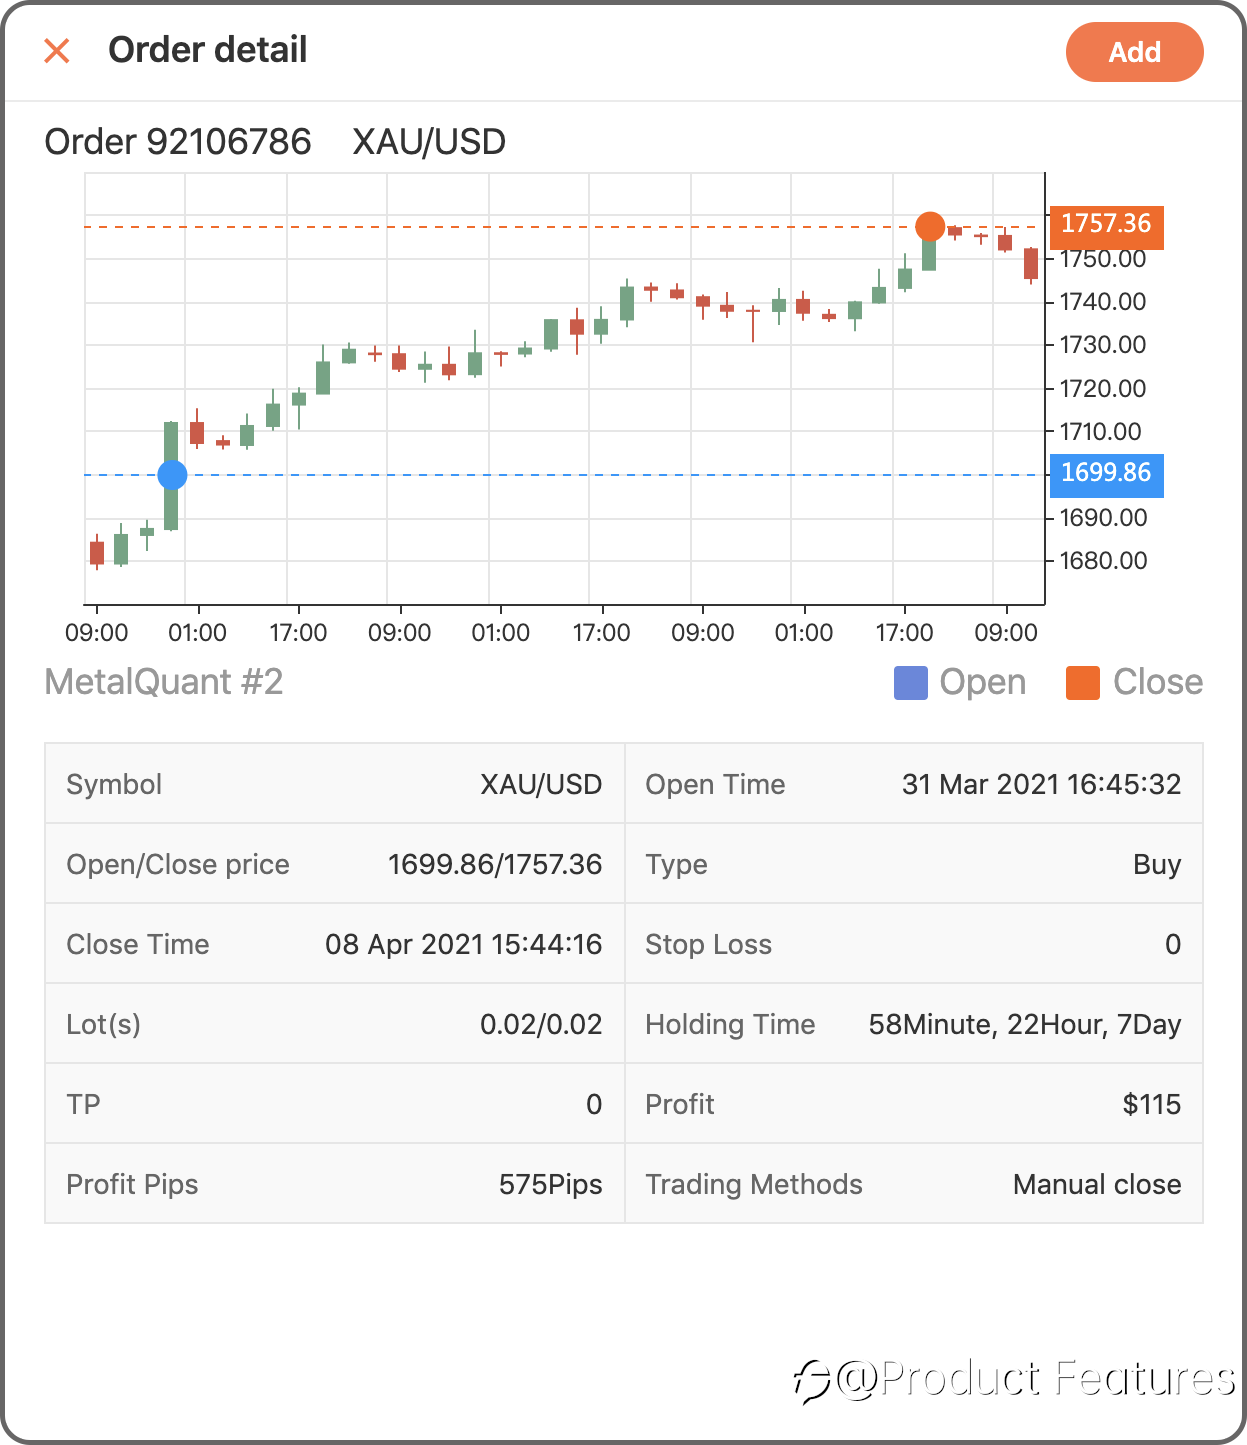 How to Add Trading Order or Trading Record